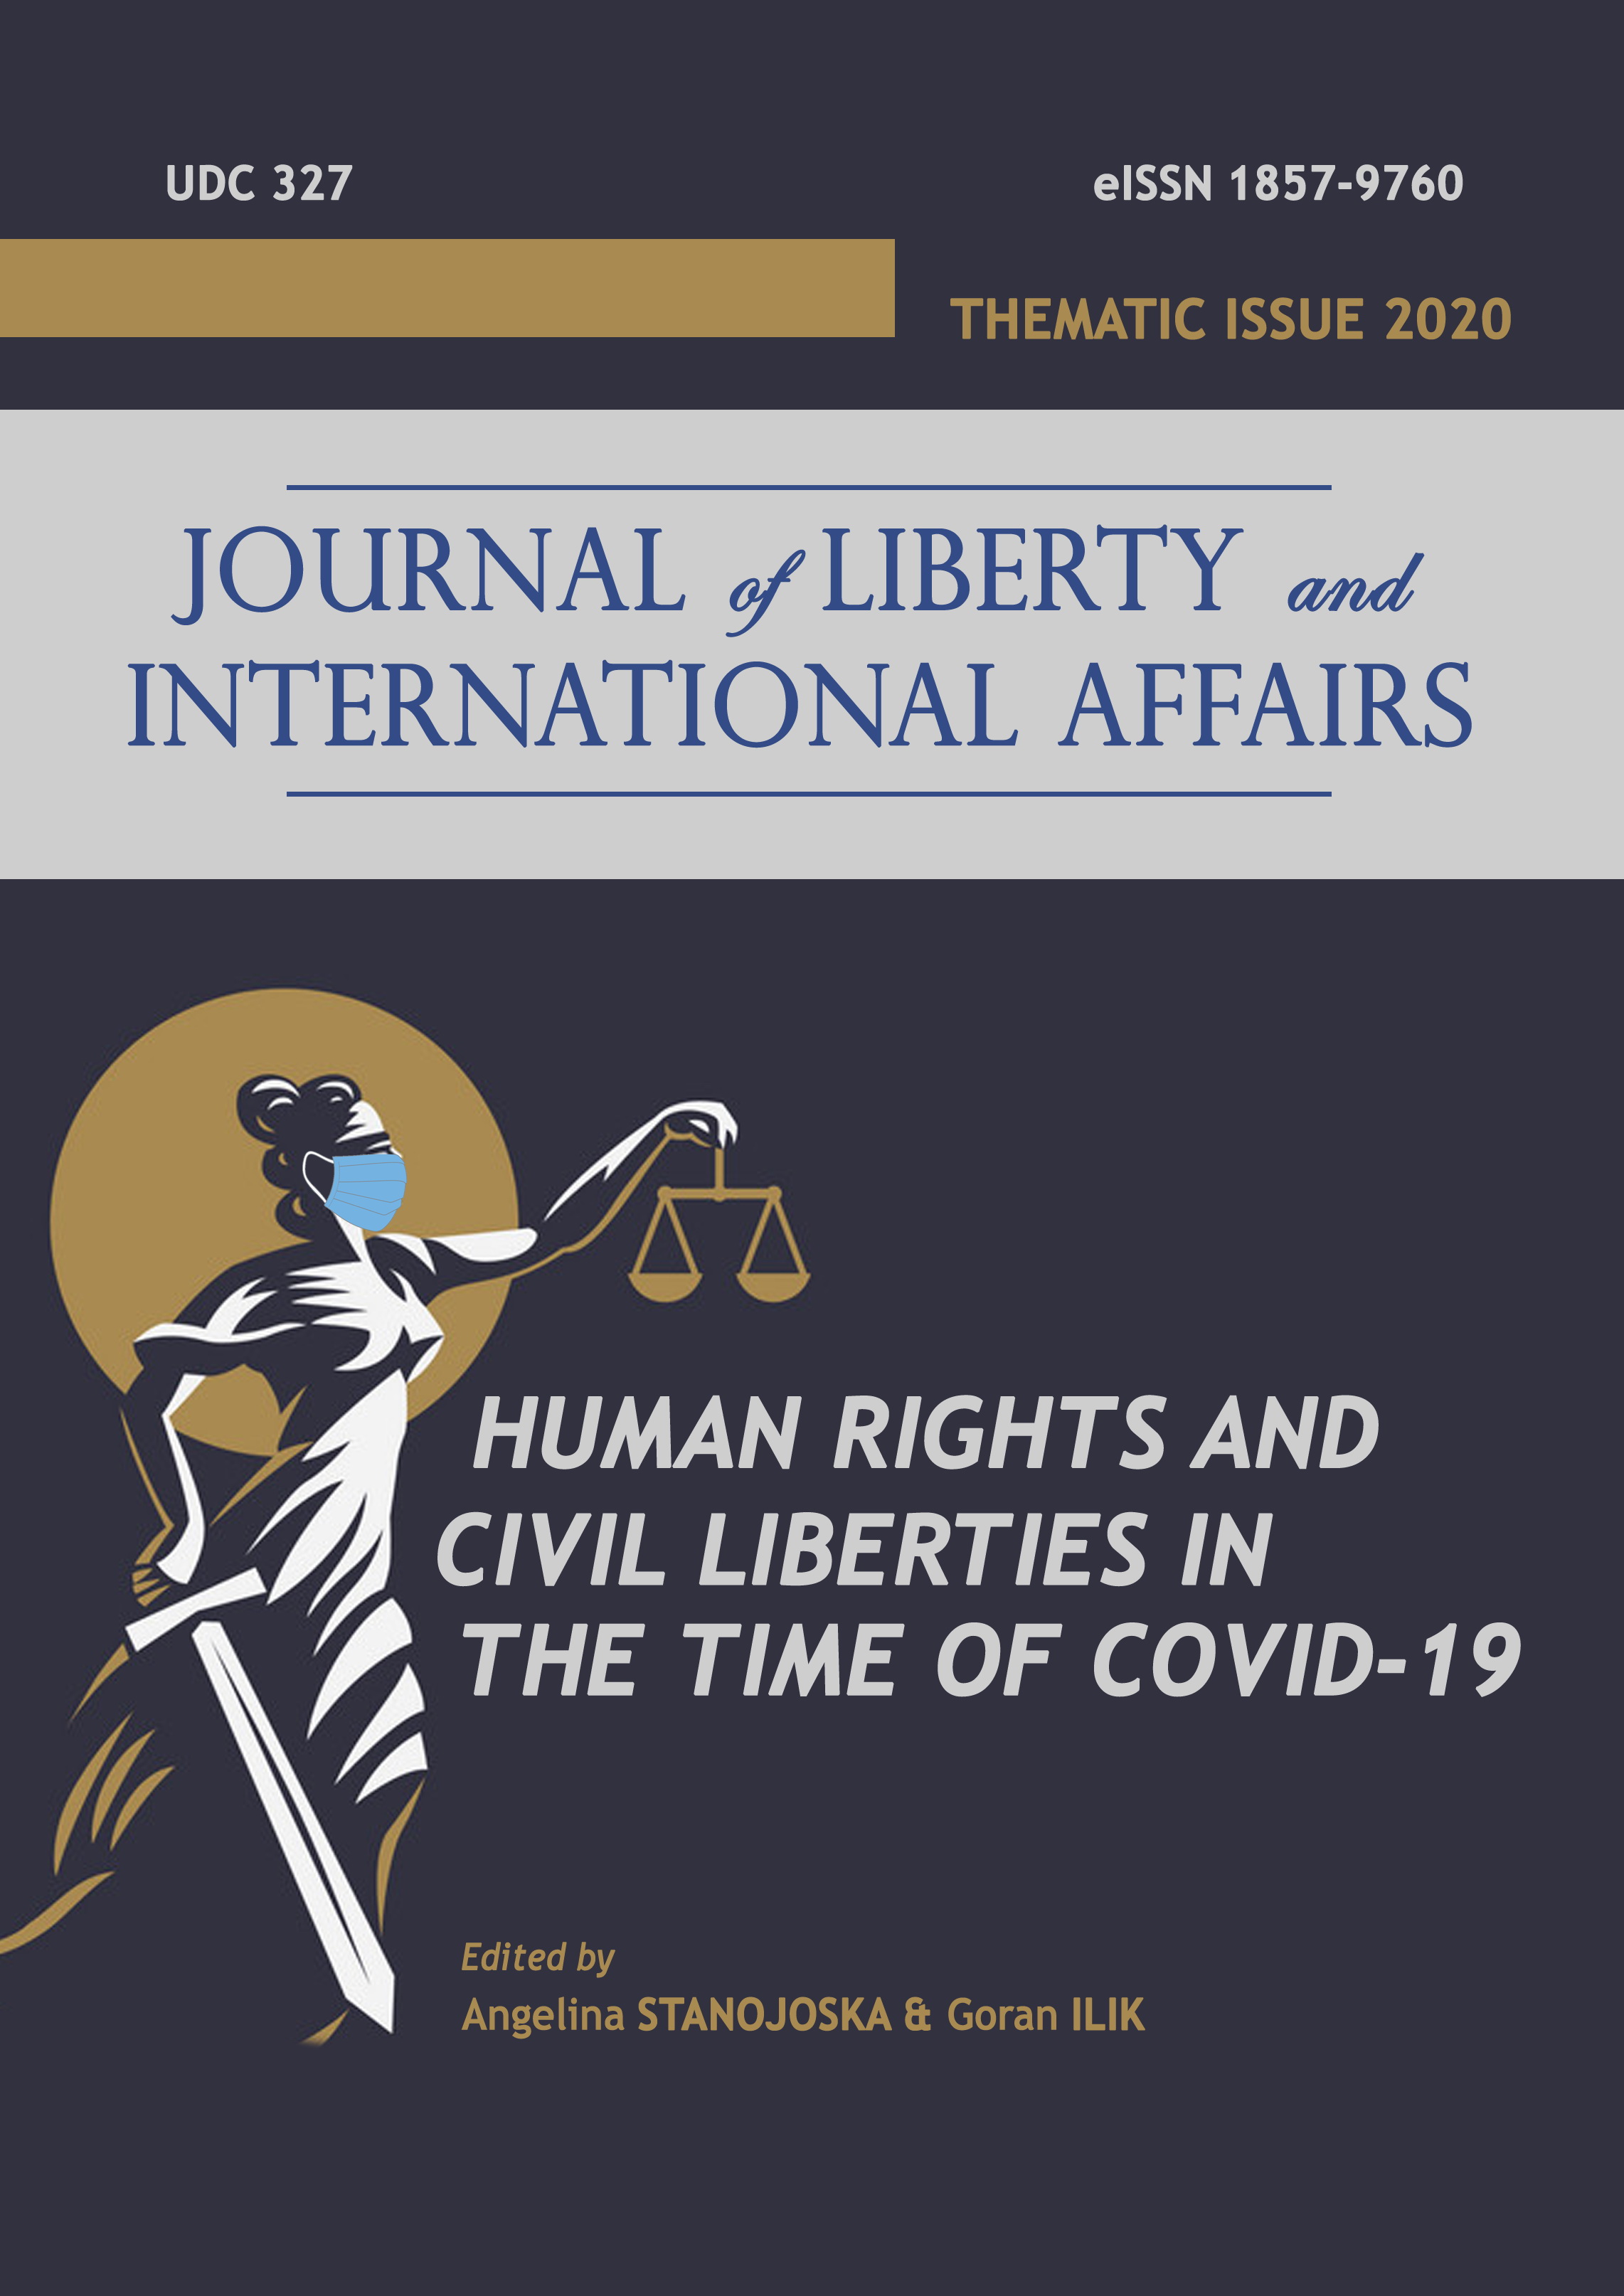 HUMAN RIGHTS AND CIVIL LIBERTIES IN THE TIME OF COVID-19